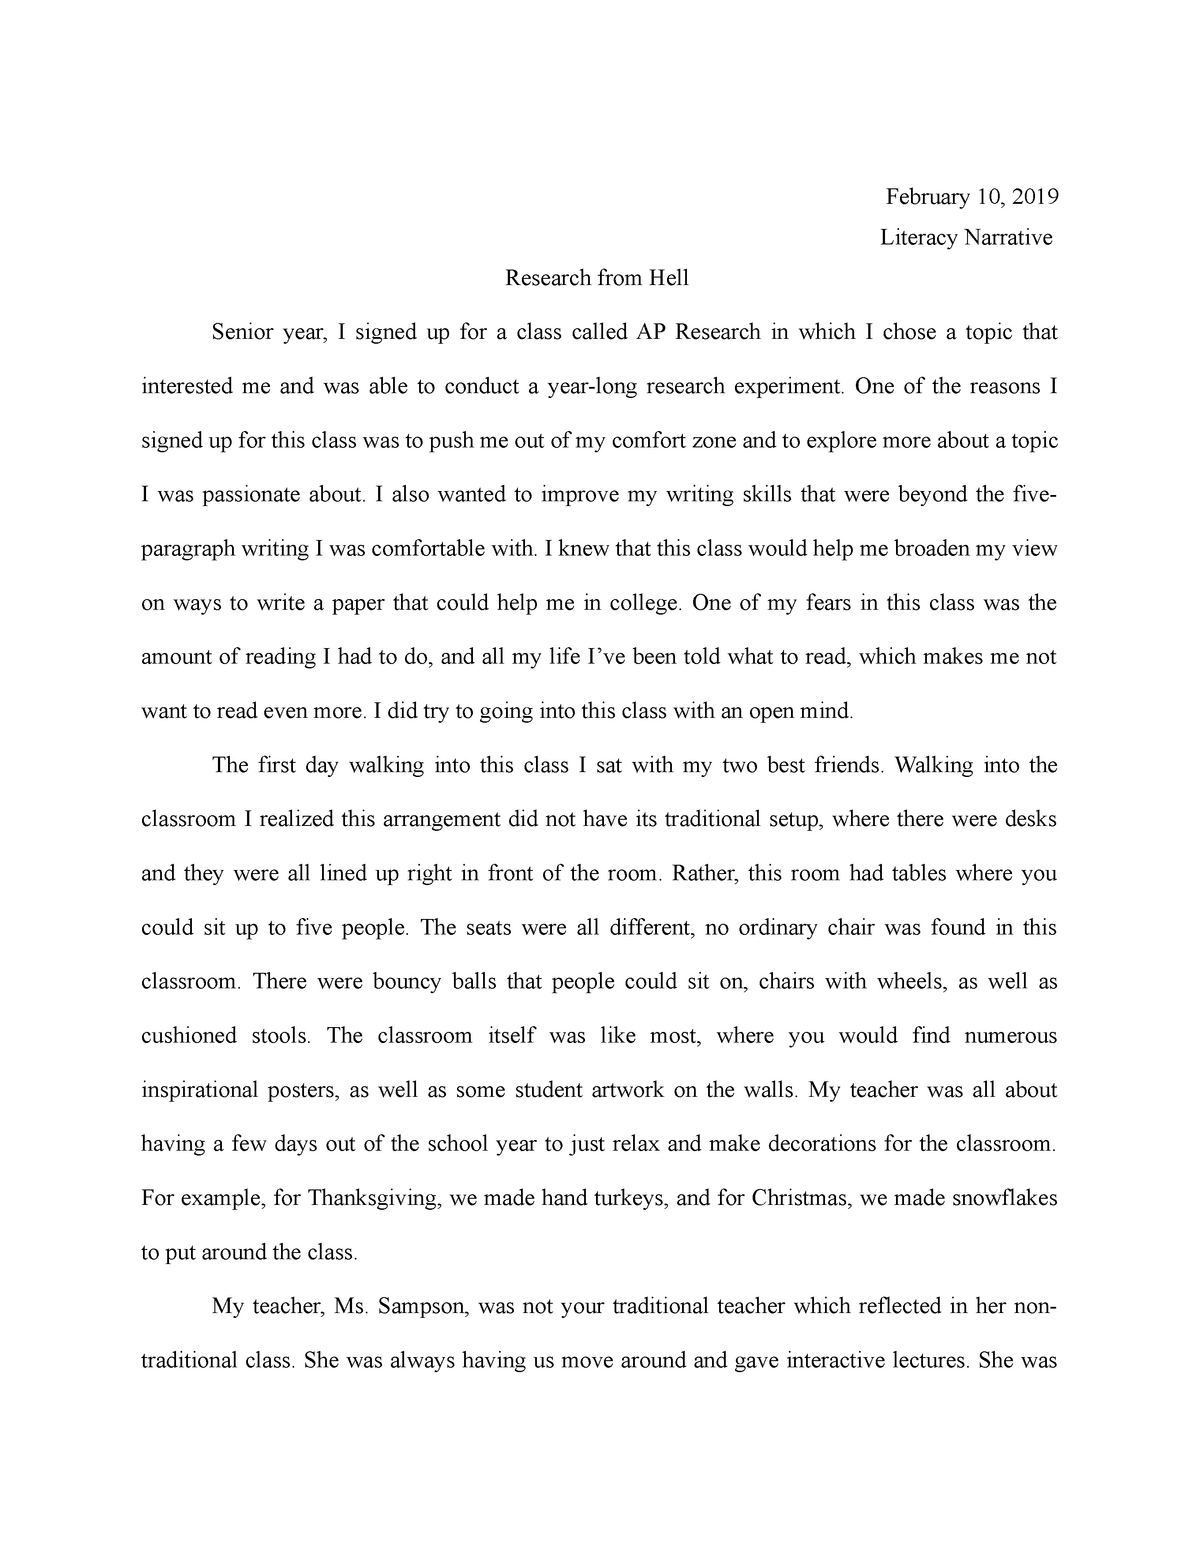 literacy narrative essay examples about reading writing